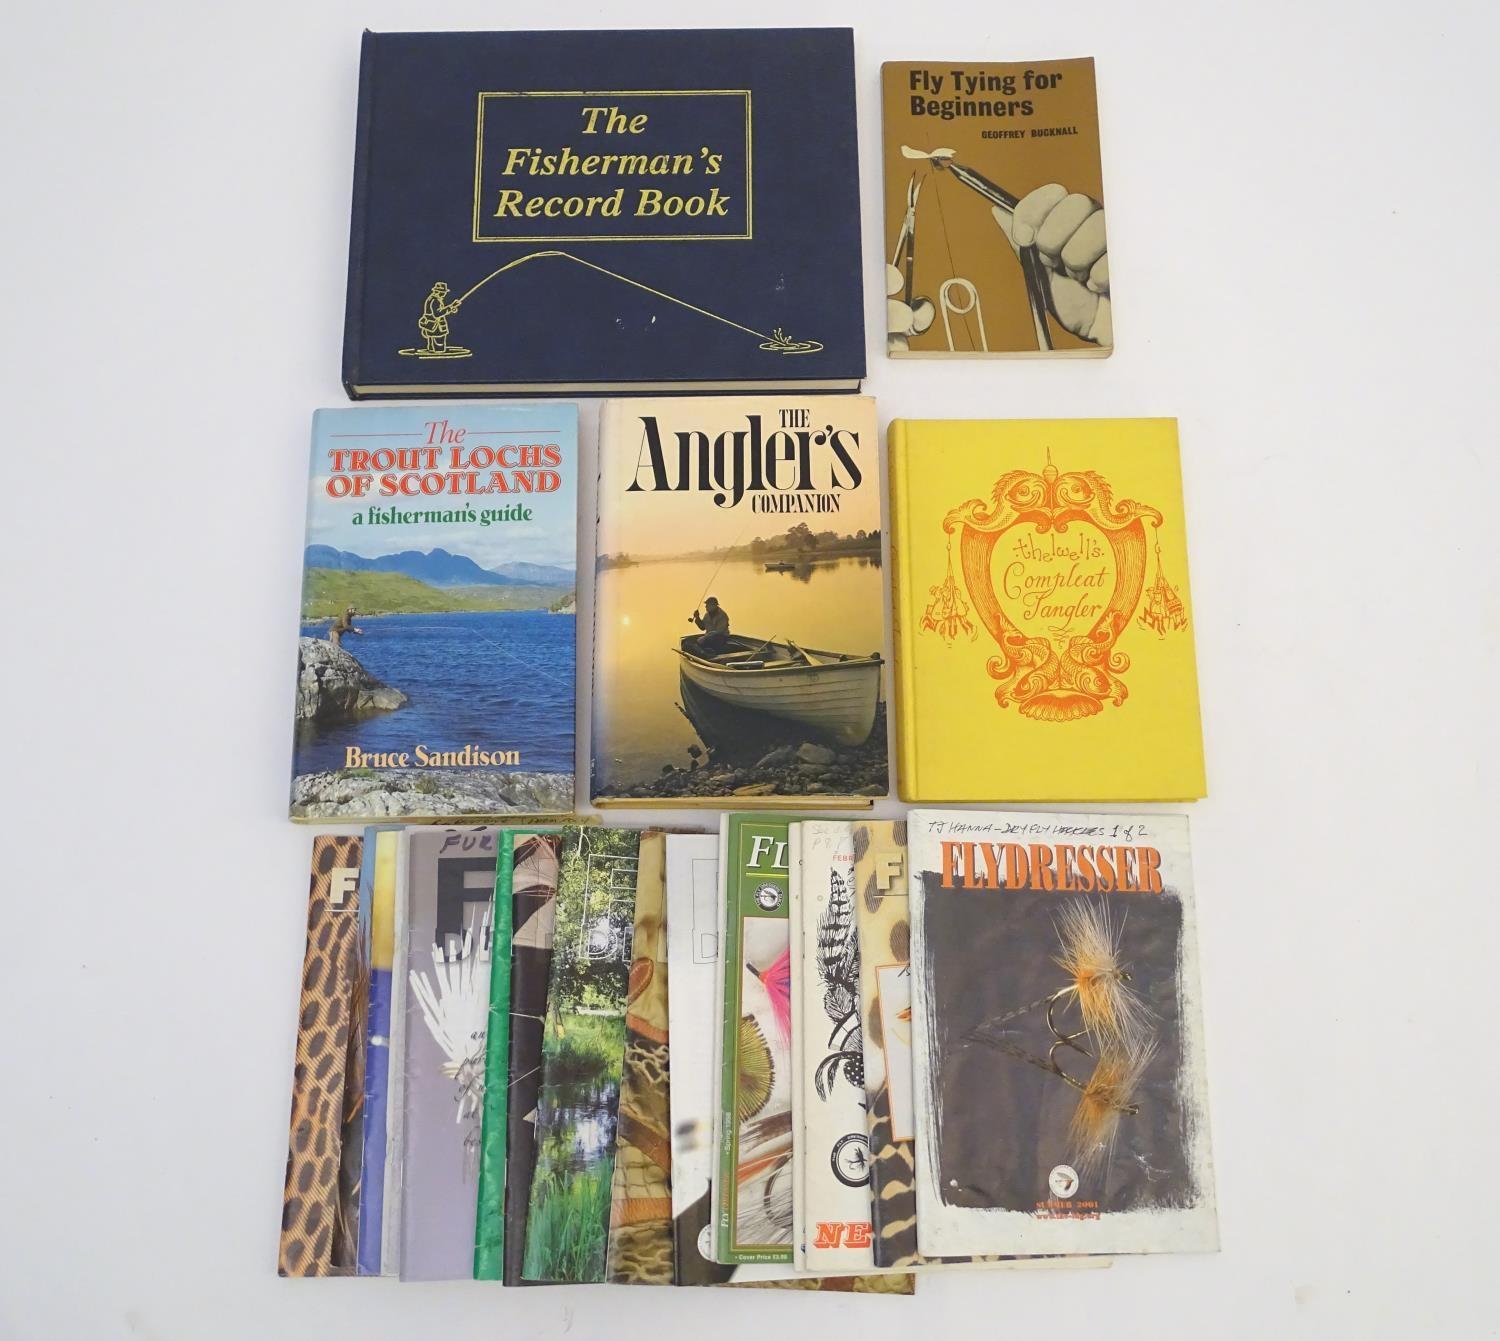 Books: A quantity of books on the subject of fishing, to include The Art and Craftsmanship of Fly